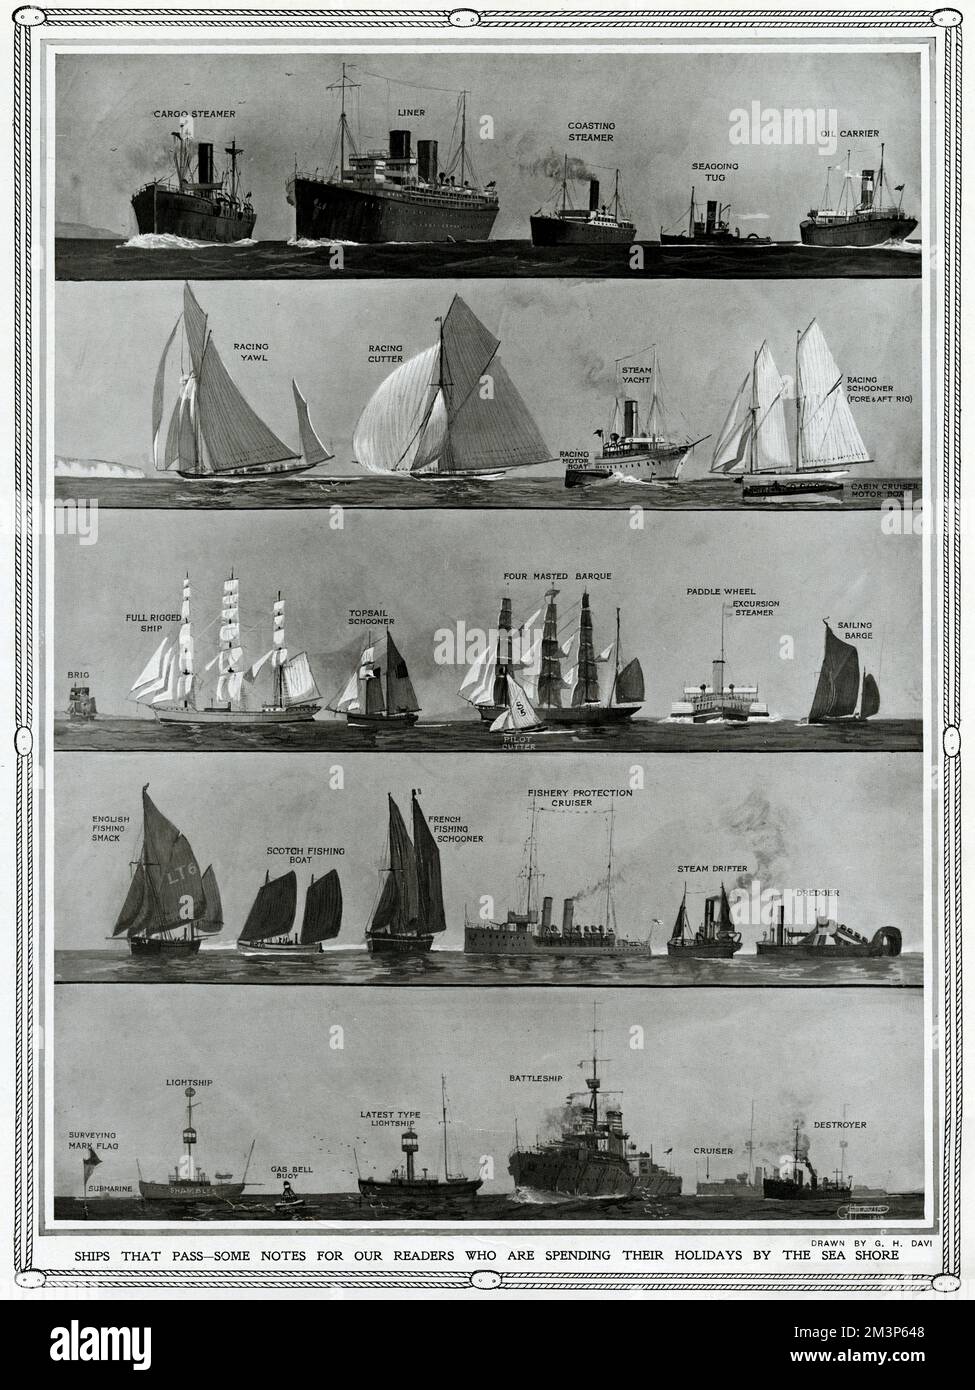 Ships that pass -- some notes for our readers who are spending their holidays by the sea shore.  The ships are: cargo steamer, liner, coasting steamer, seagoing tug, oil carrier, racing yawl, racing cutter, steam yacht, racing schooner, brig, full rigged ship, topsail schooner, four masted barque, paddle wheel excursion steamer, sailing barge, English fishing smack, Scotch fishing boat, French fishing schooner, fishery protection cruiser, steam drifter, dredger, surveying mark flag, submarine, lightship, gas bell buoy, latest type lightship, battleship, cruiser and destroyer. Stock Photo